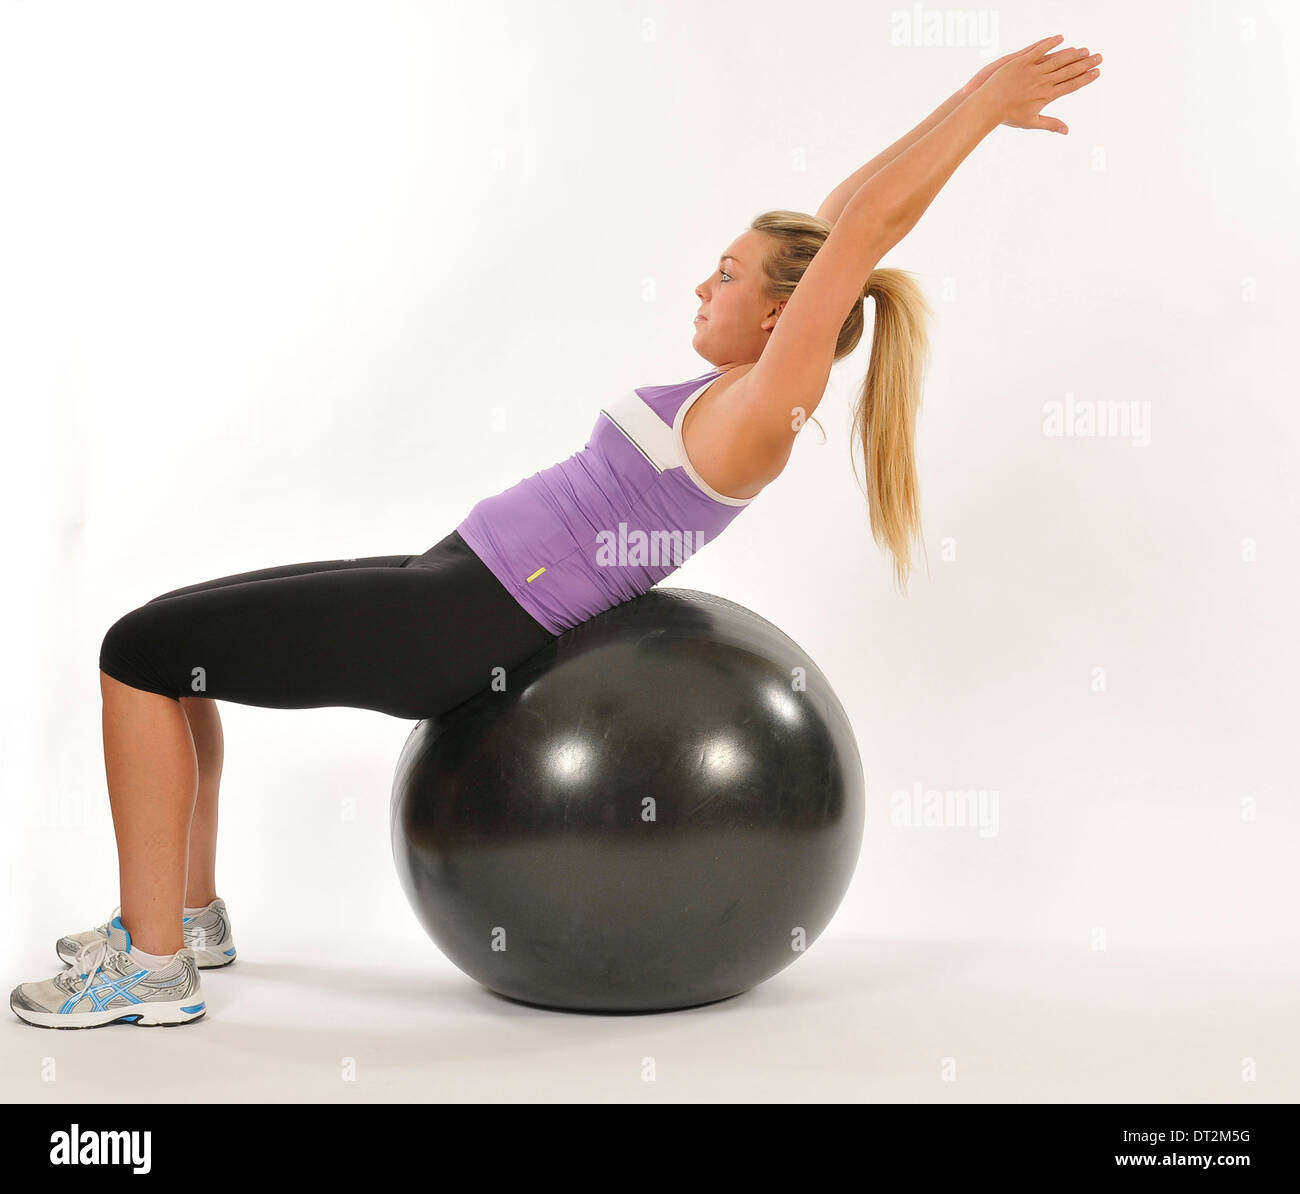 Exercise on fit ball to increase strength and core stability Stock Photo